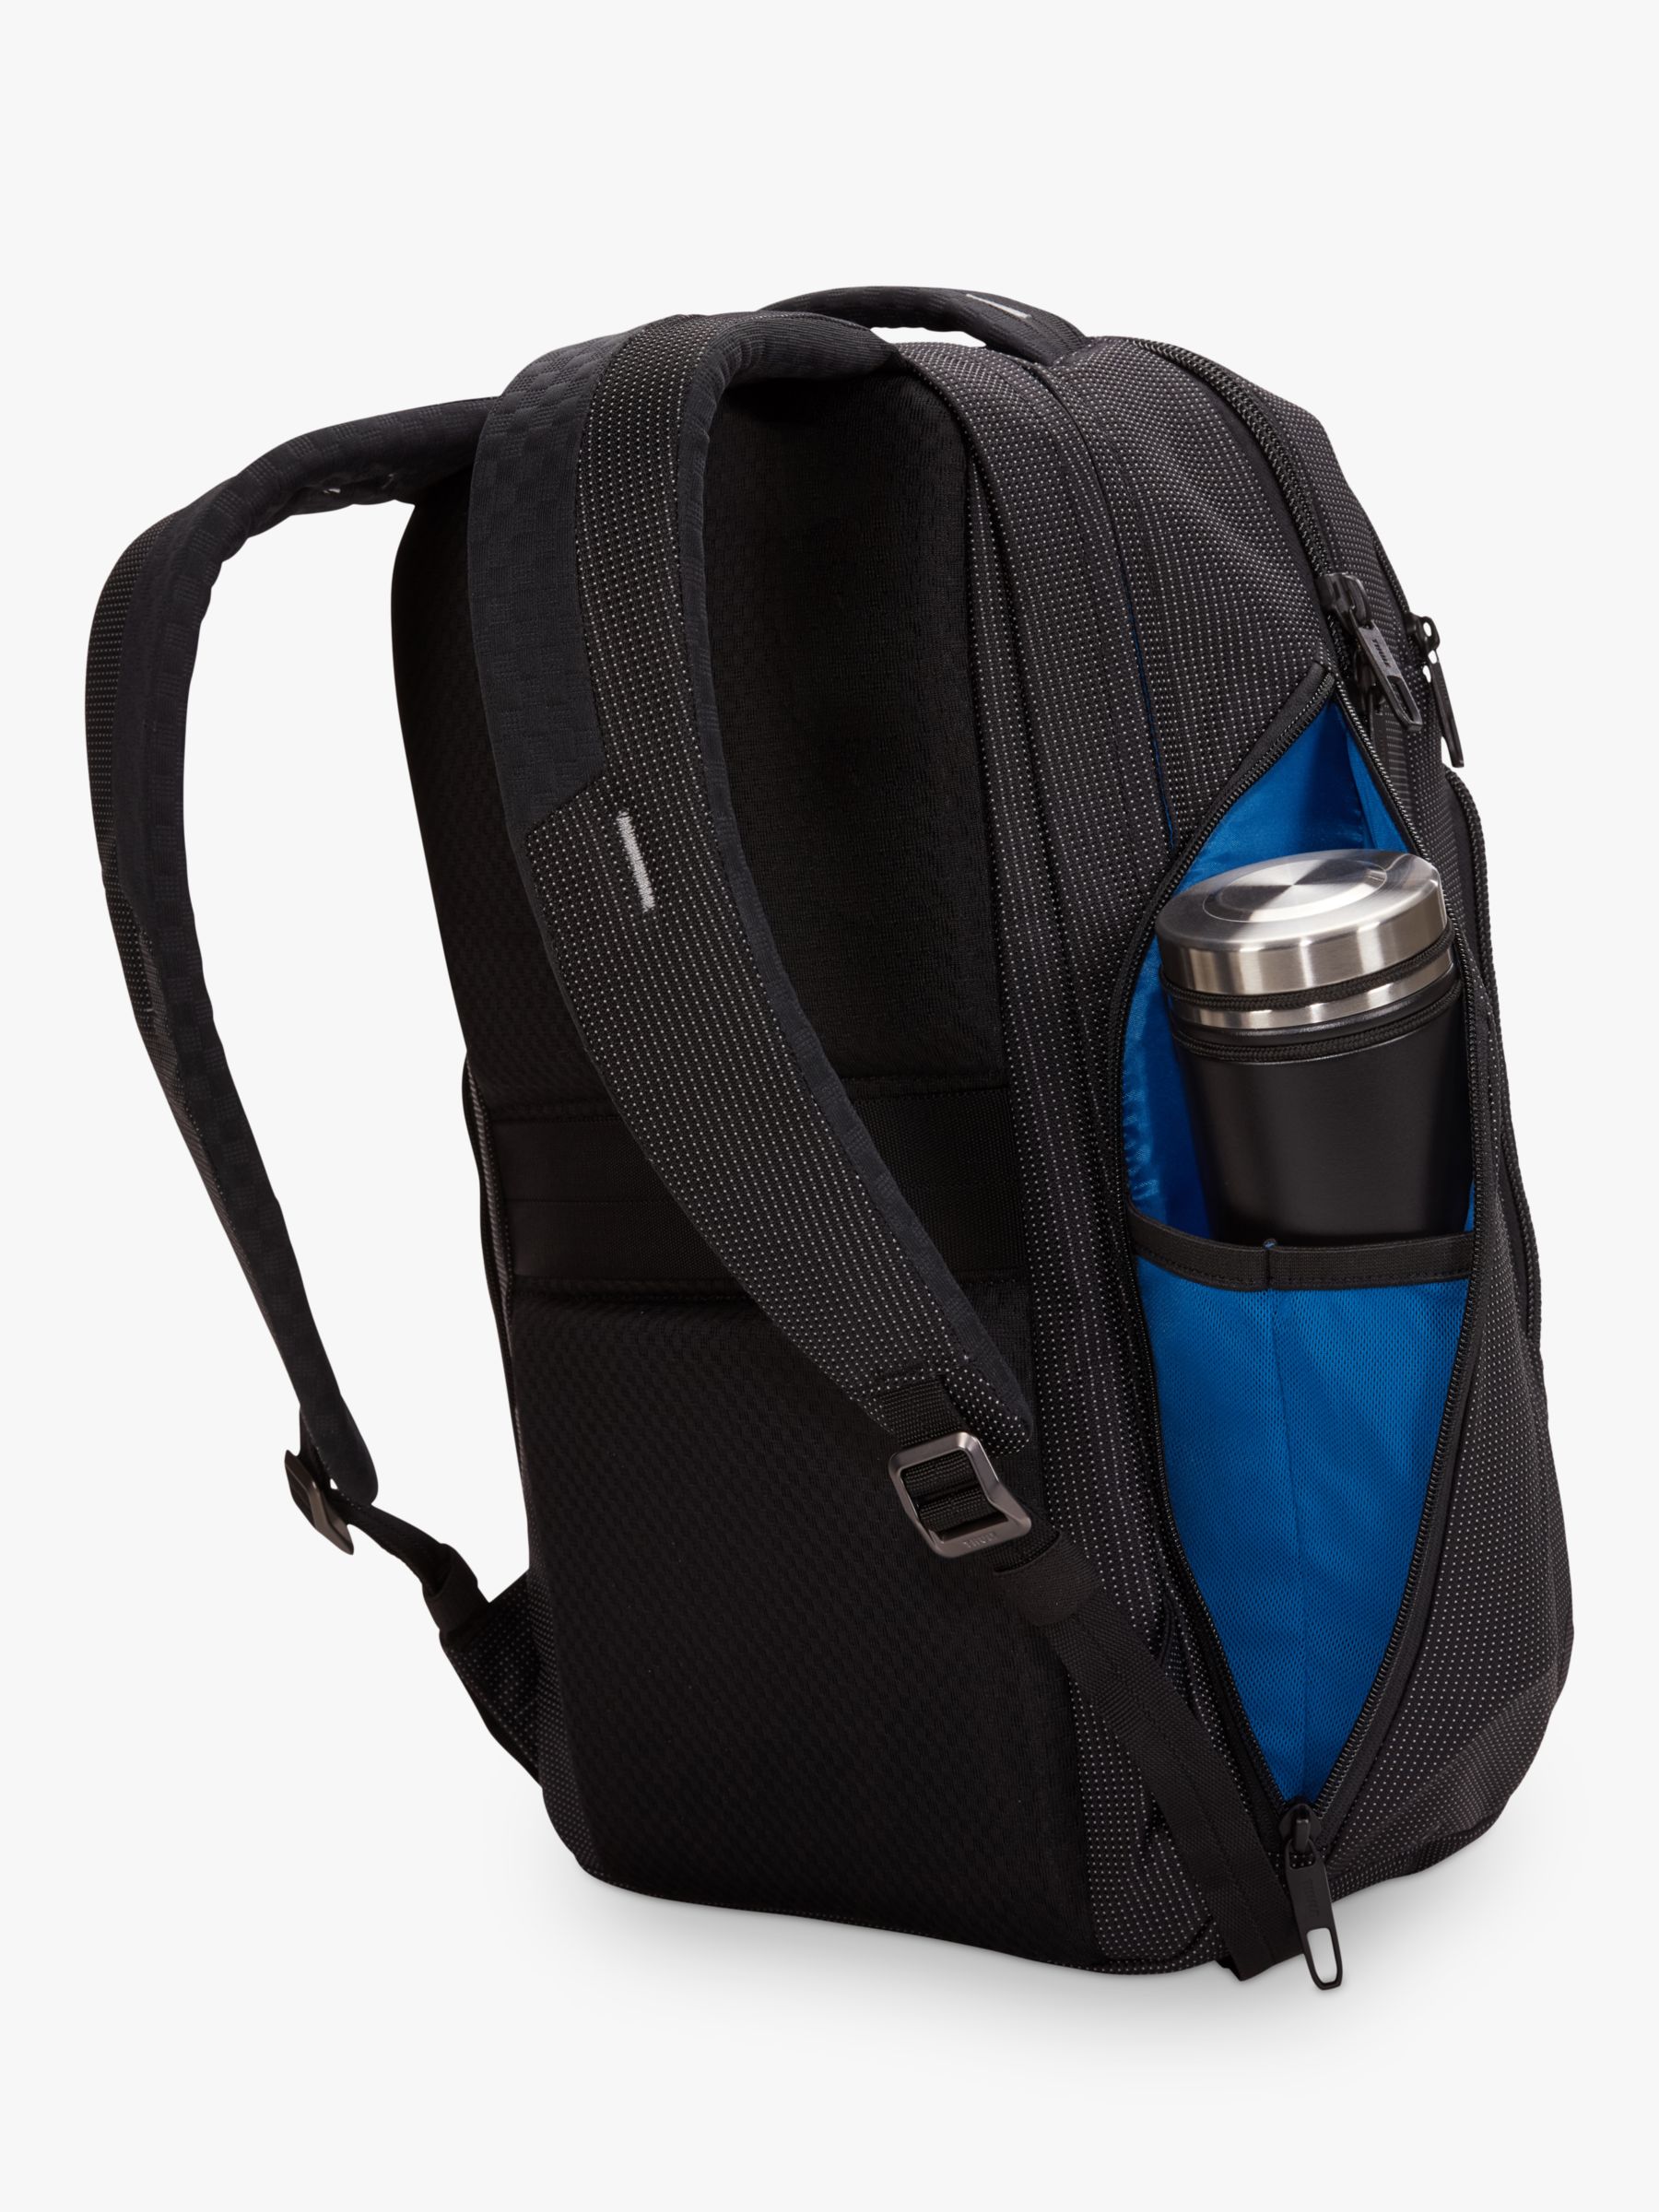 Thule Crossover 2 30L Backpack, Black at John Lewis & Partners